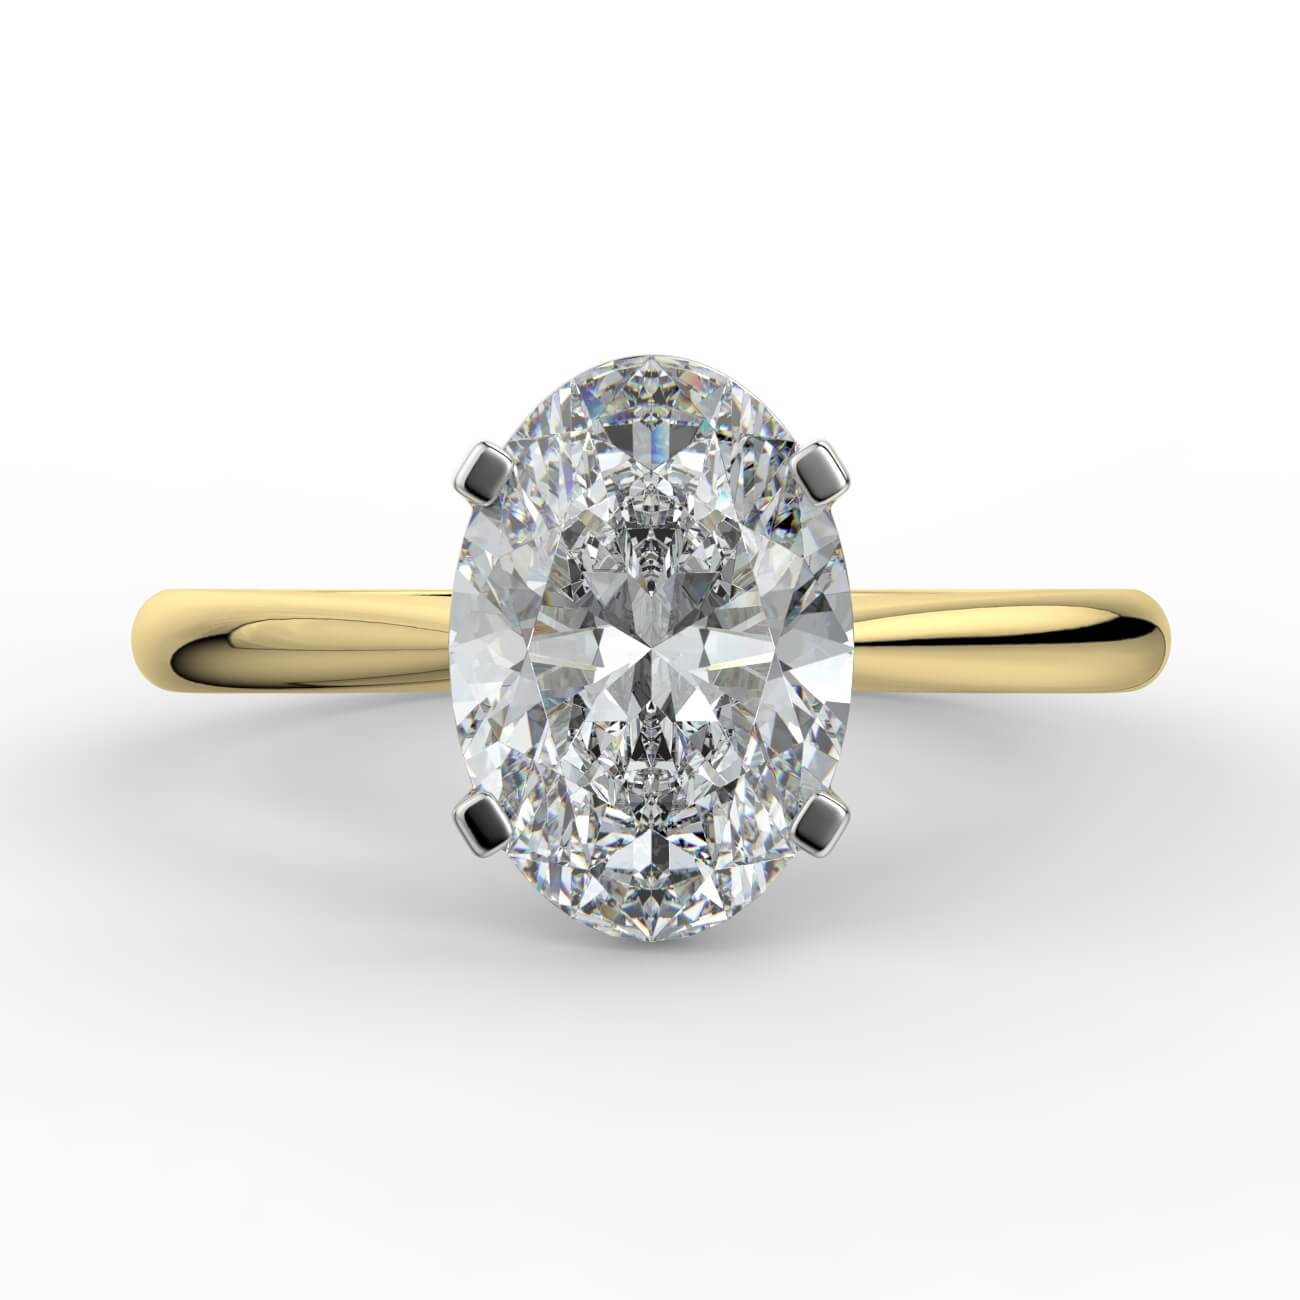 Oval cut diamond cathedral engagement ring in yellow and white gold – Australian Diamond Network